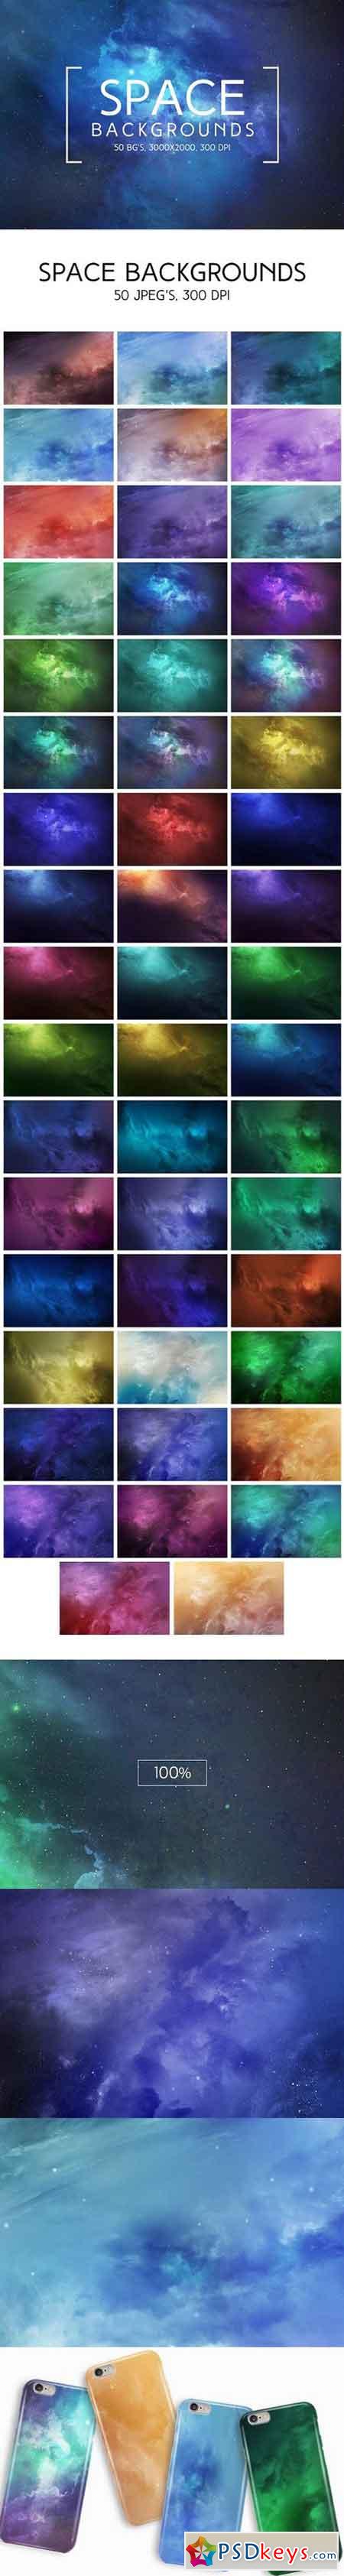 50 Space Backgrounds 1151907